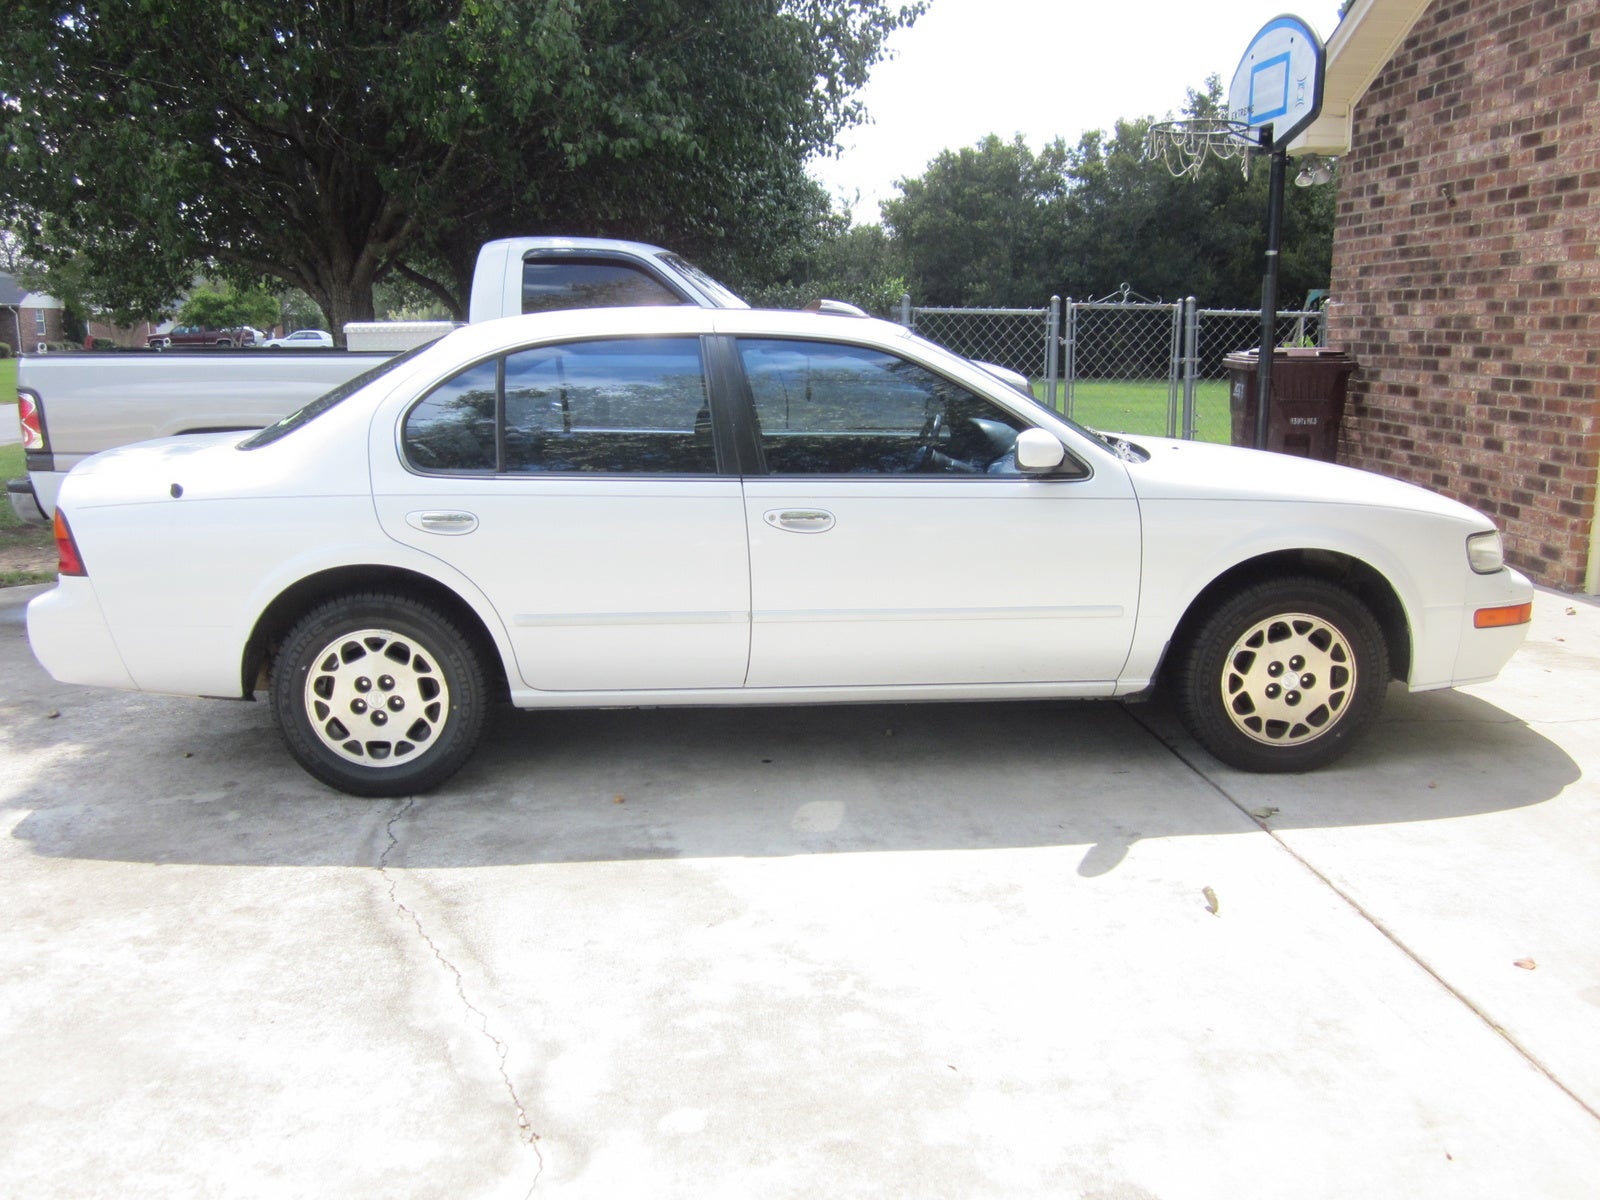 Picture of a 1996 nissan maxima #8